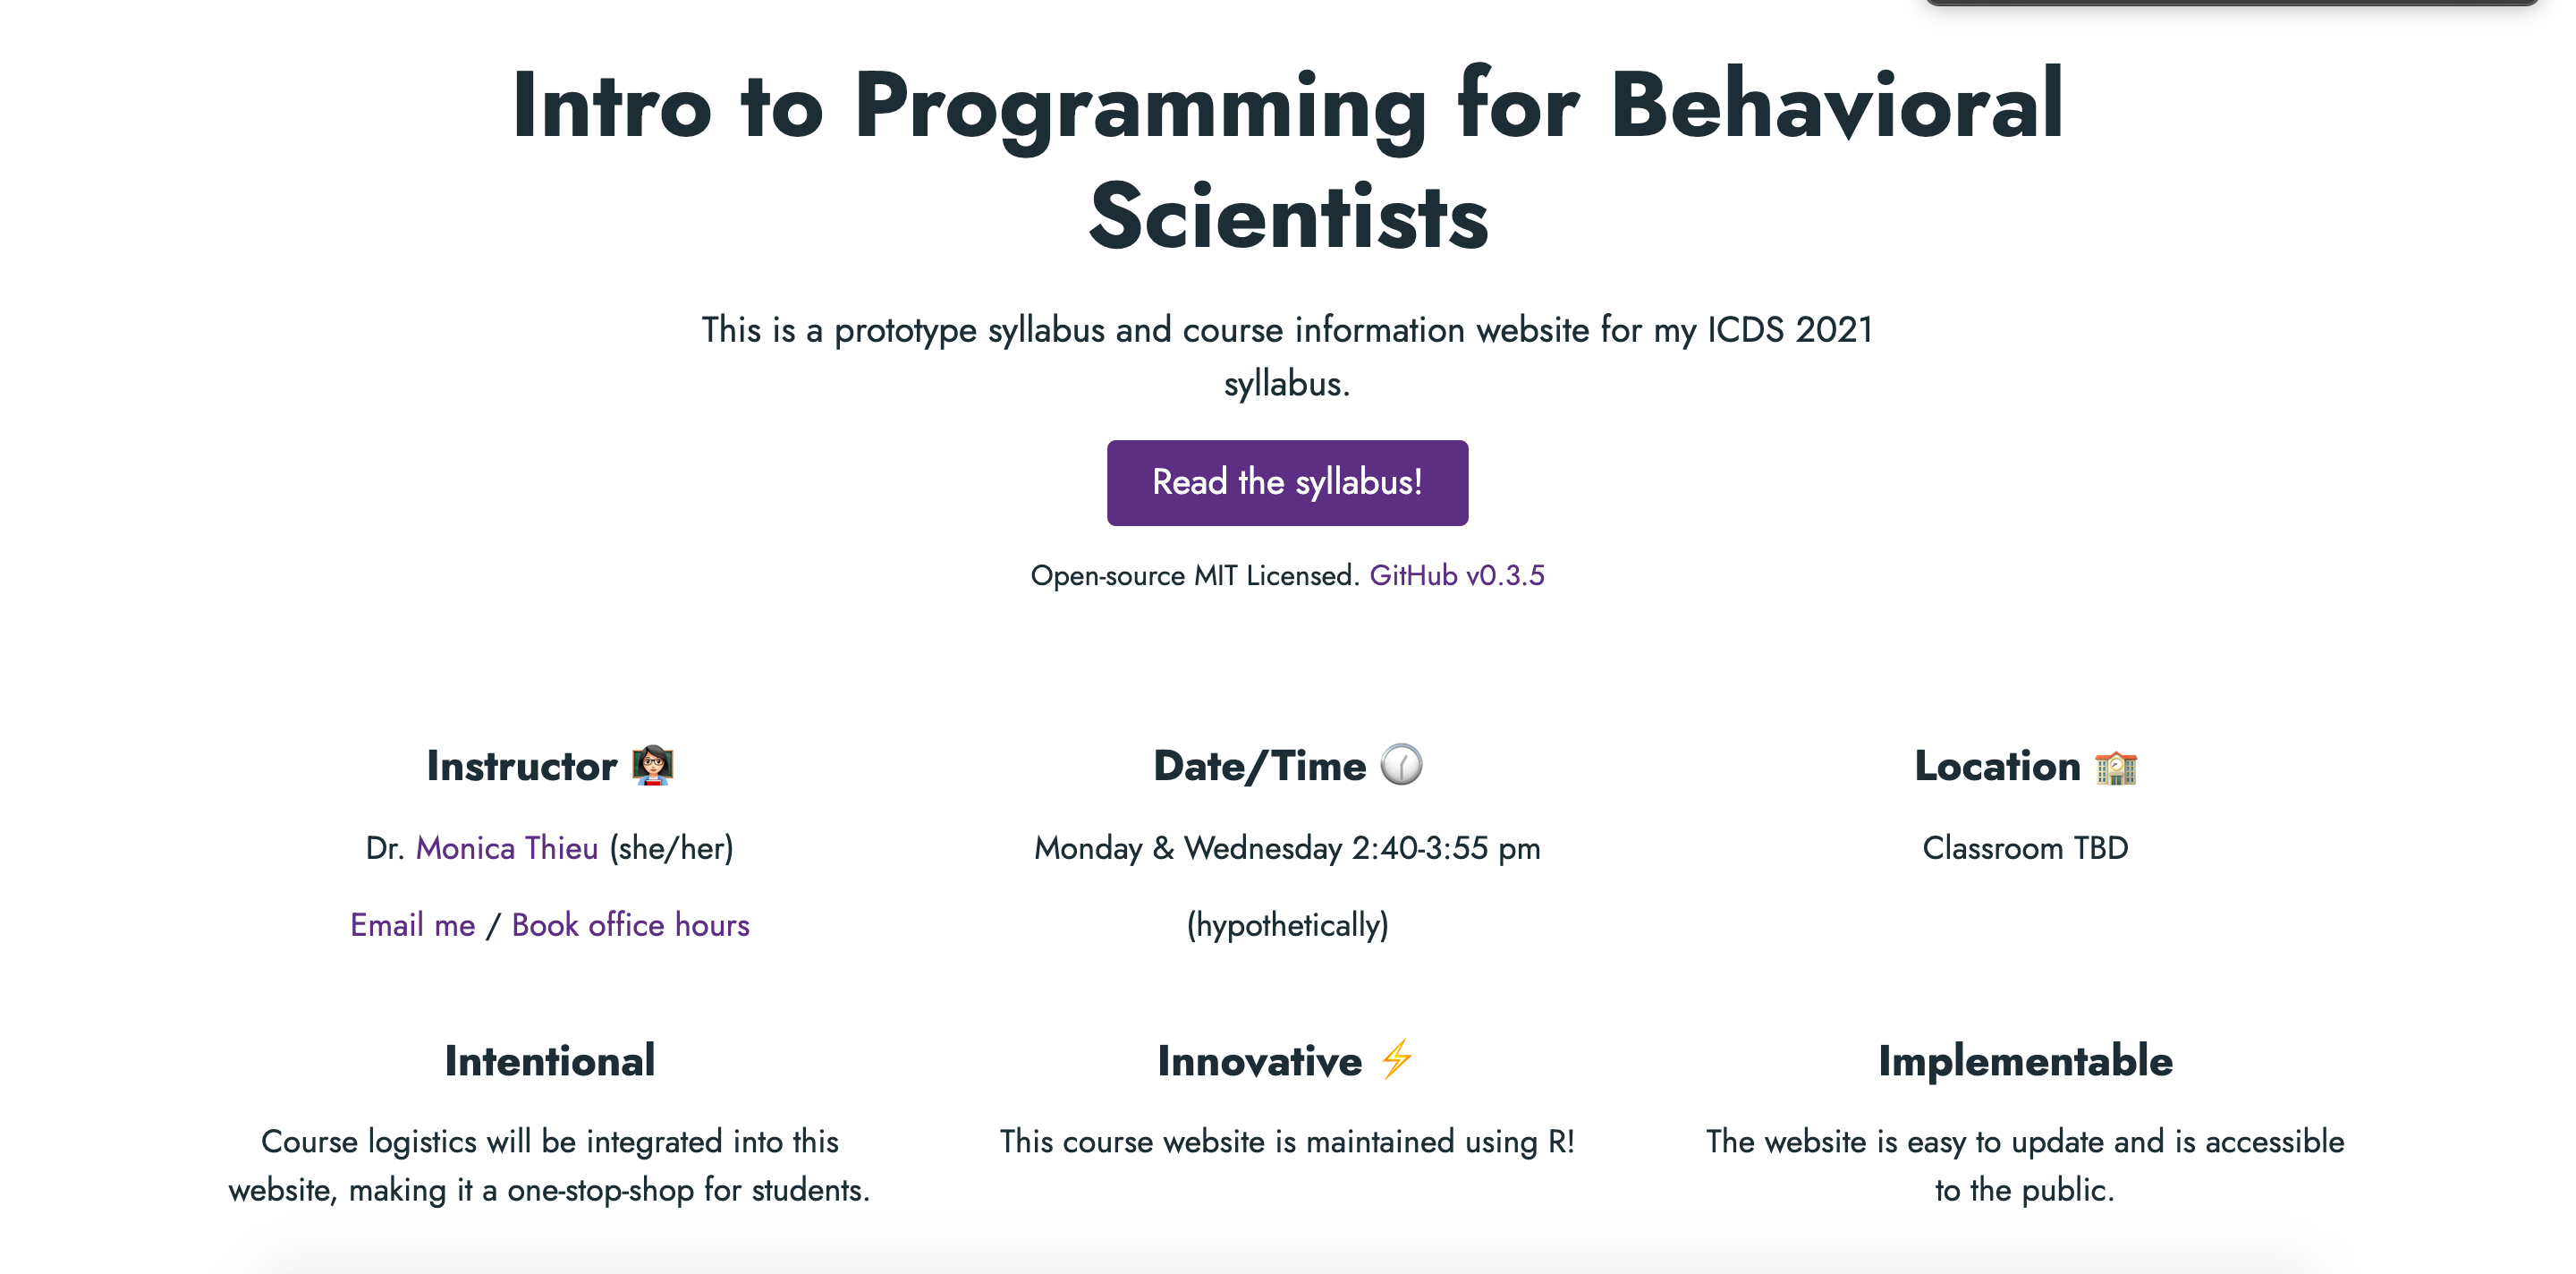 Intro to Programming for Behavioral Scientists syllabus